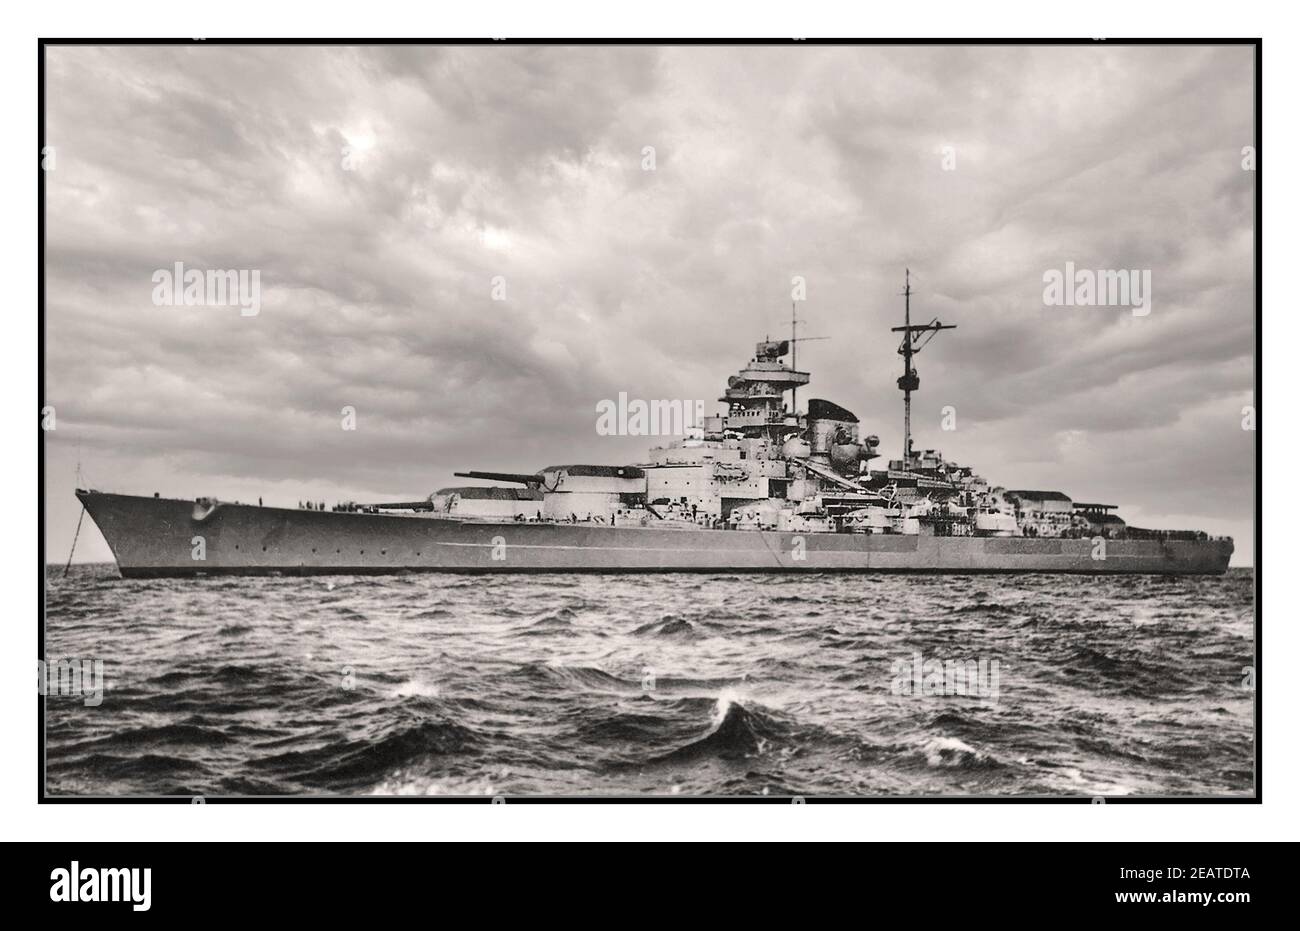 Tirpitz Battleship WW2 Nazi Germany Kriegsmarine the second of two Bismarck-class battleships built for Nazi Germany's Kriegsmarine (navy) prior to and during the Second World War. Named after Grand Admiral Alfred von Tirpitz, the architect of the Kaiserliche Marine (Imperial Navy), the ship was laid down at the Kriegsmarinewerft Wilhelmshaven in November 1936 and her hull was launched two and a half years later. Work was completed in February 1941, when she was commissioned into the German fleet. Sunk by Royal Air Force Lancaster bombers on 12th November 1944 Stock Photo